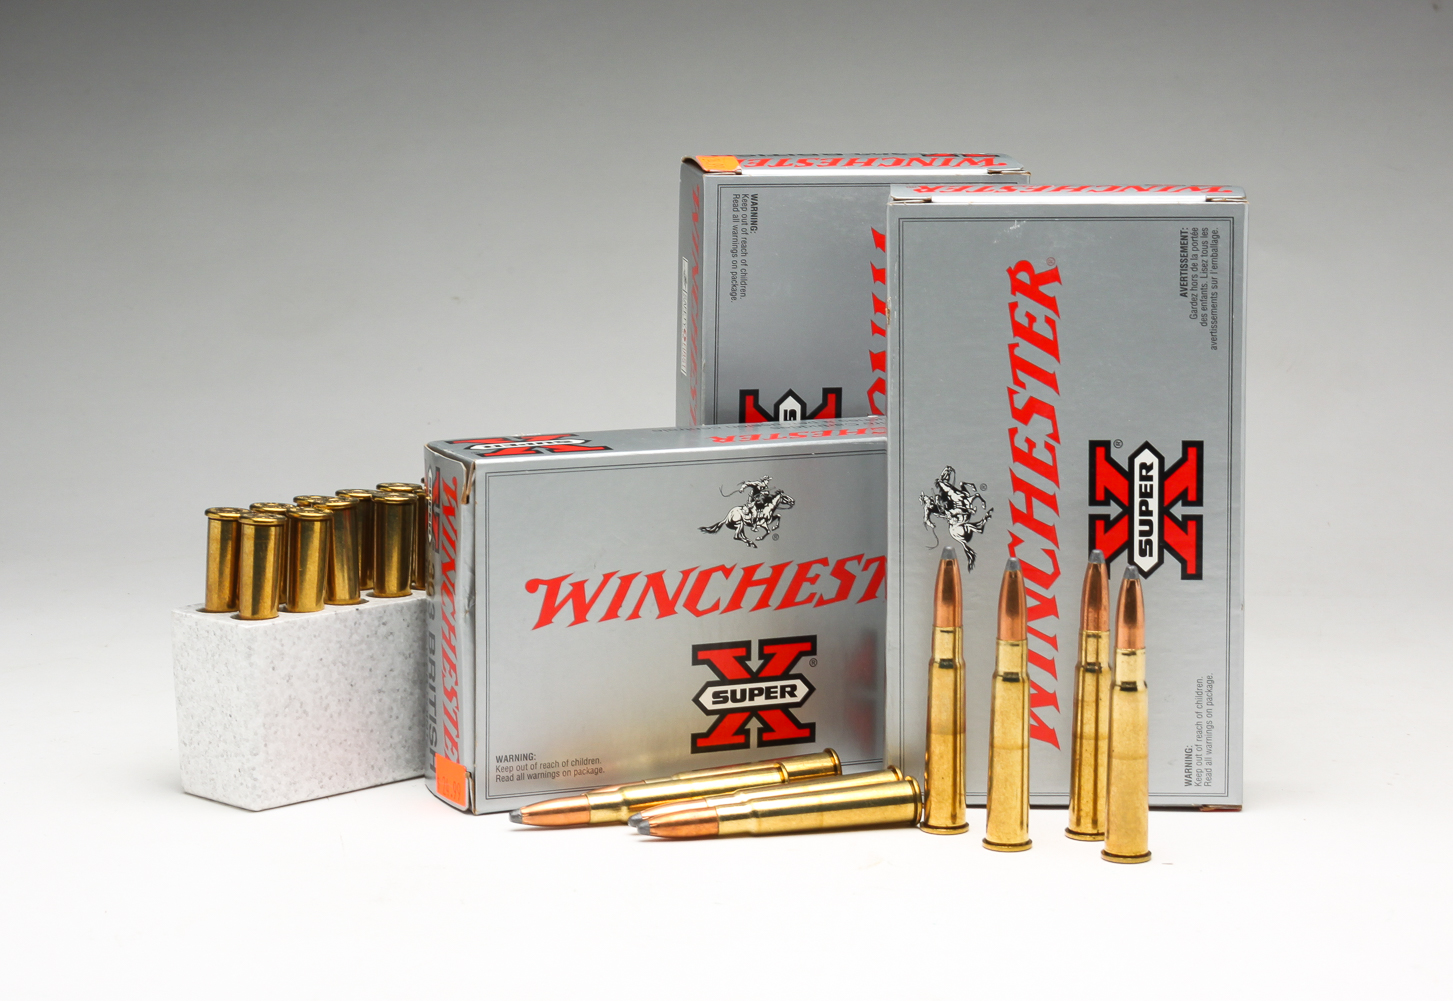 SIXTY ROUNDS OF WINCHESTER 303 31a762